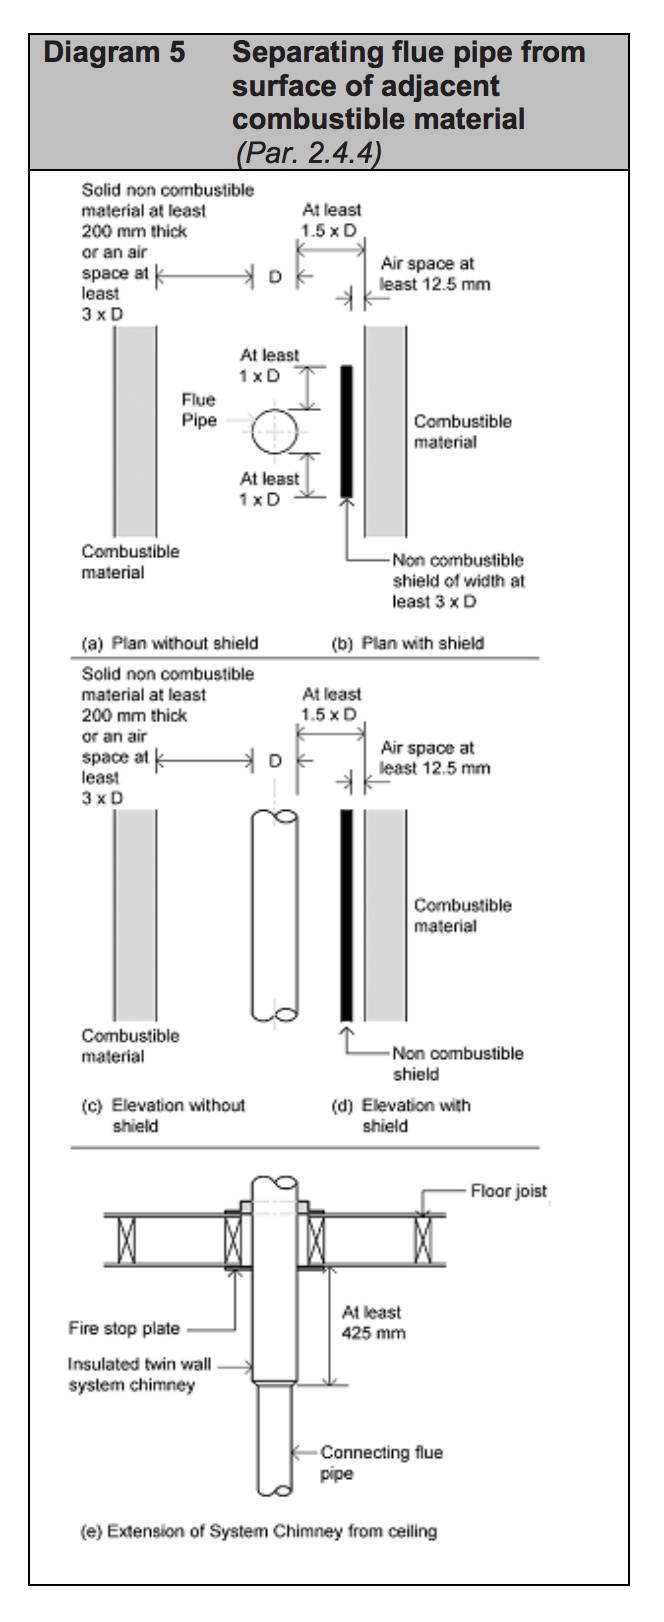 Diagram HJ5 - Separating flue pipe from surface of adjacent combustible material - Extract from TGD J